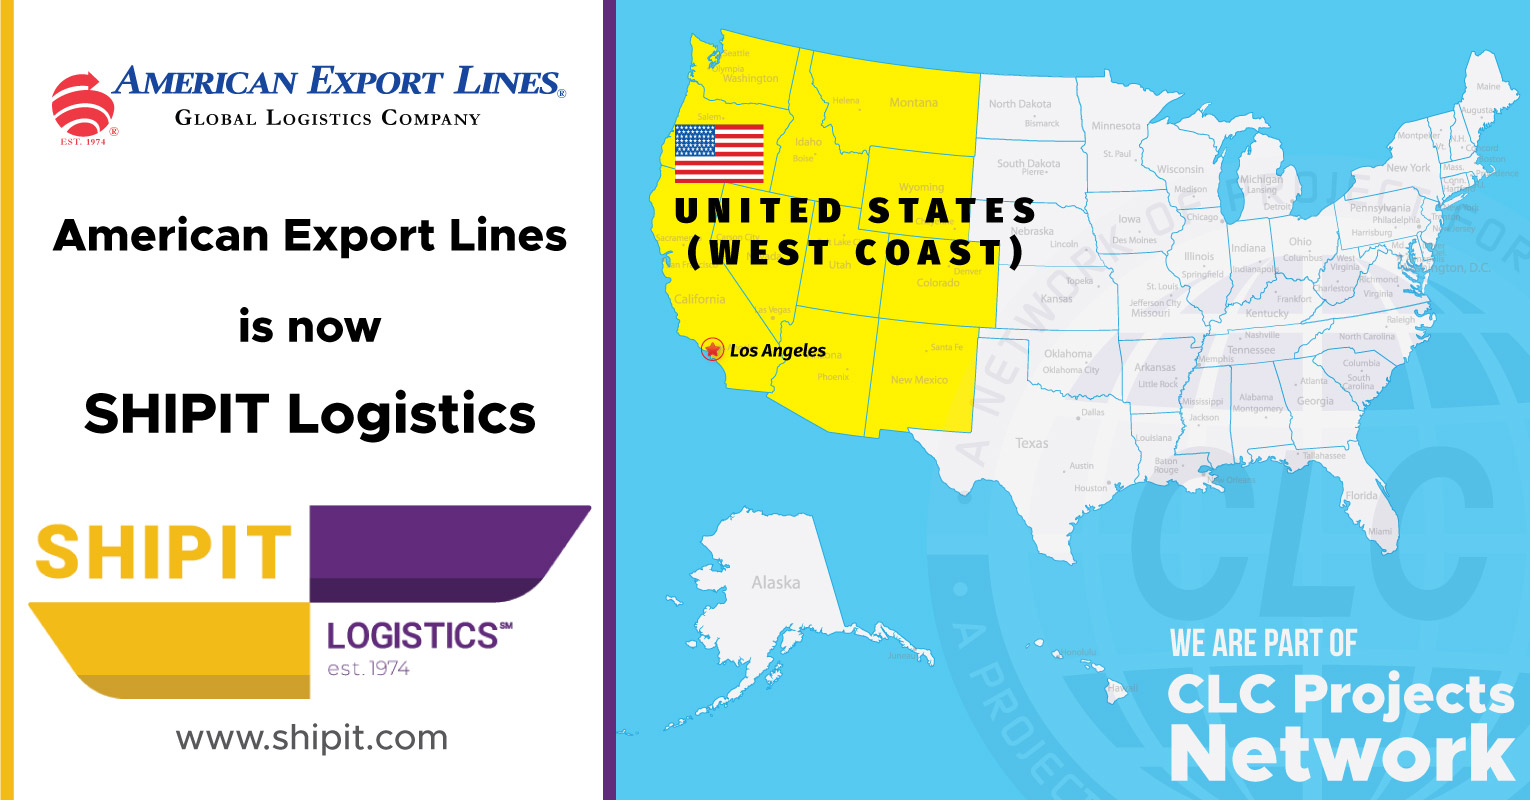 American Export Lines is now SHIPIT Logistics